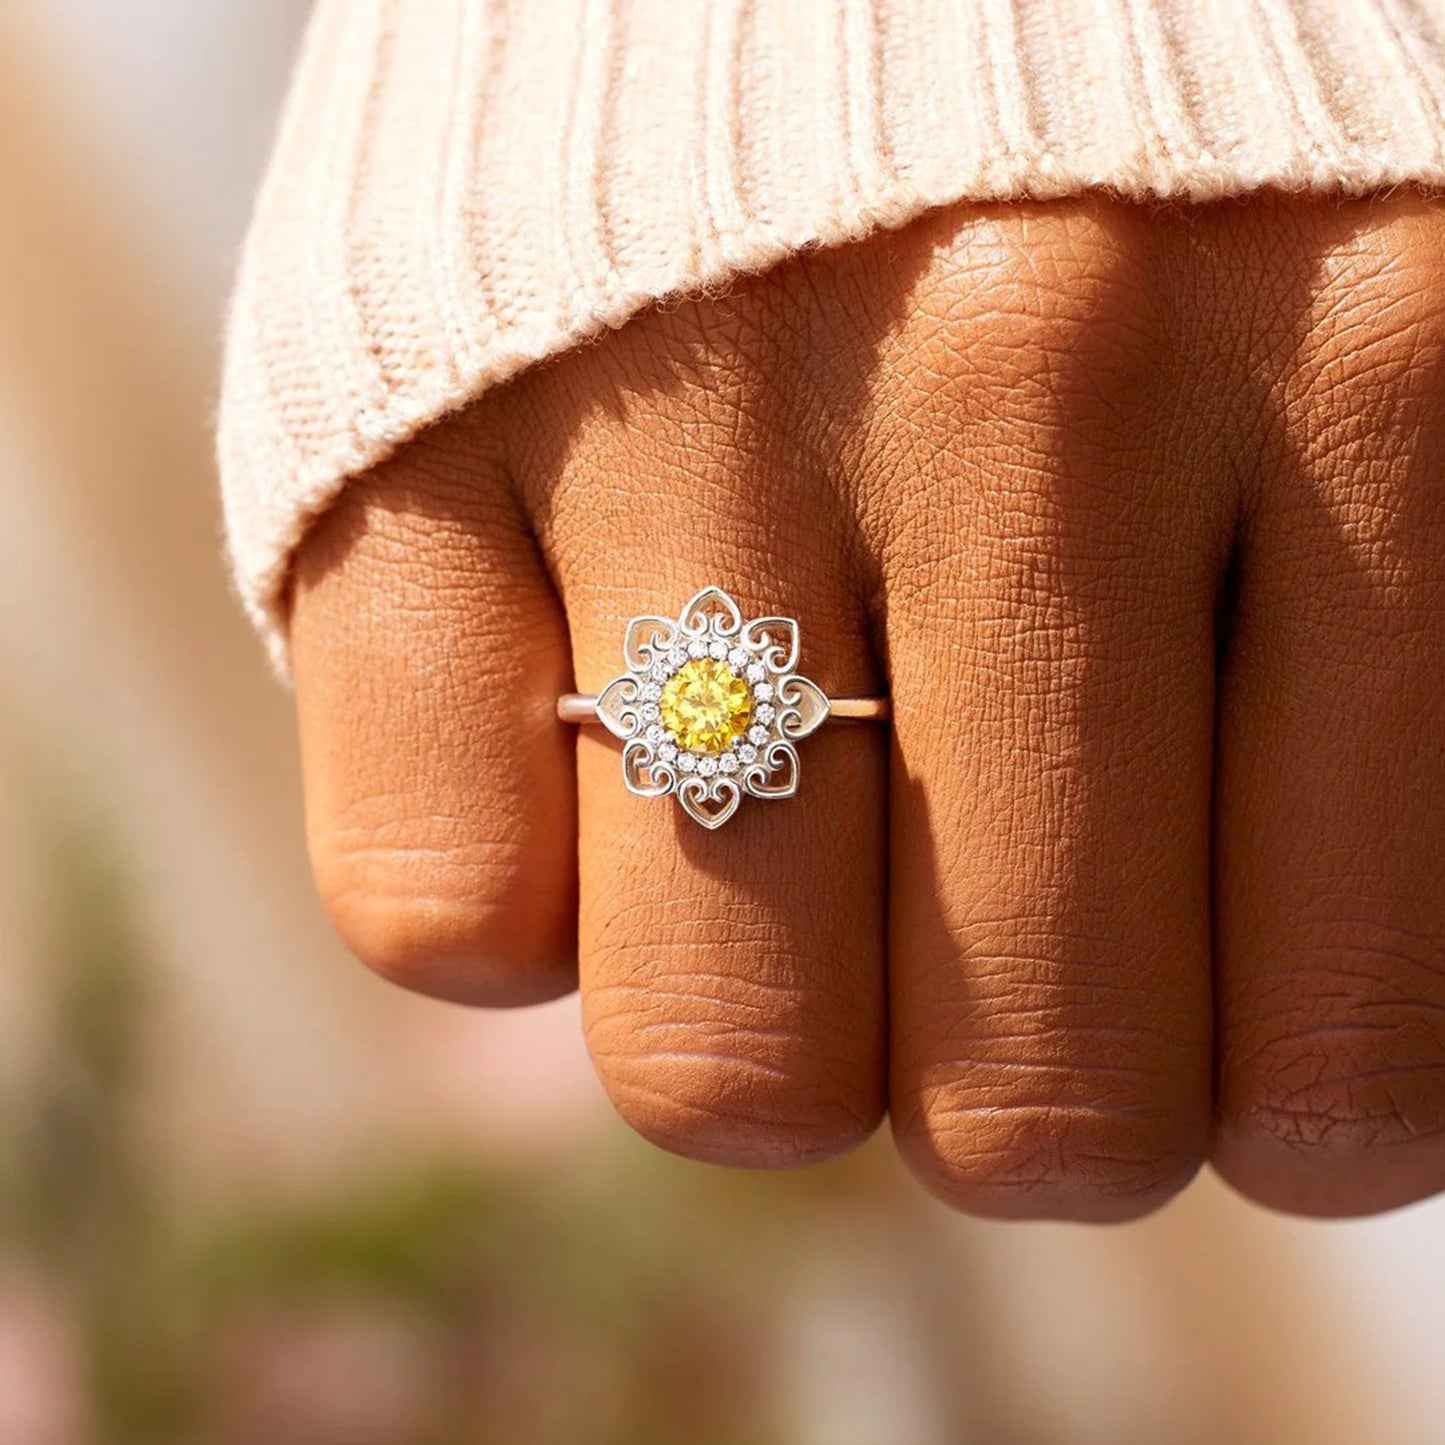 Ethereal Flower Sterling Silver Ring